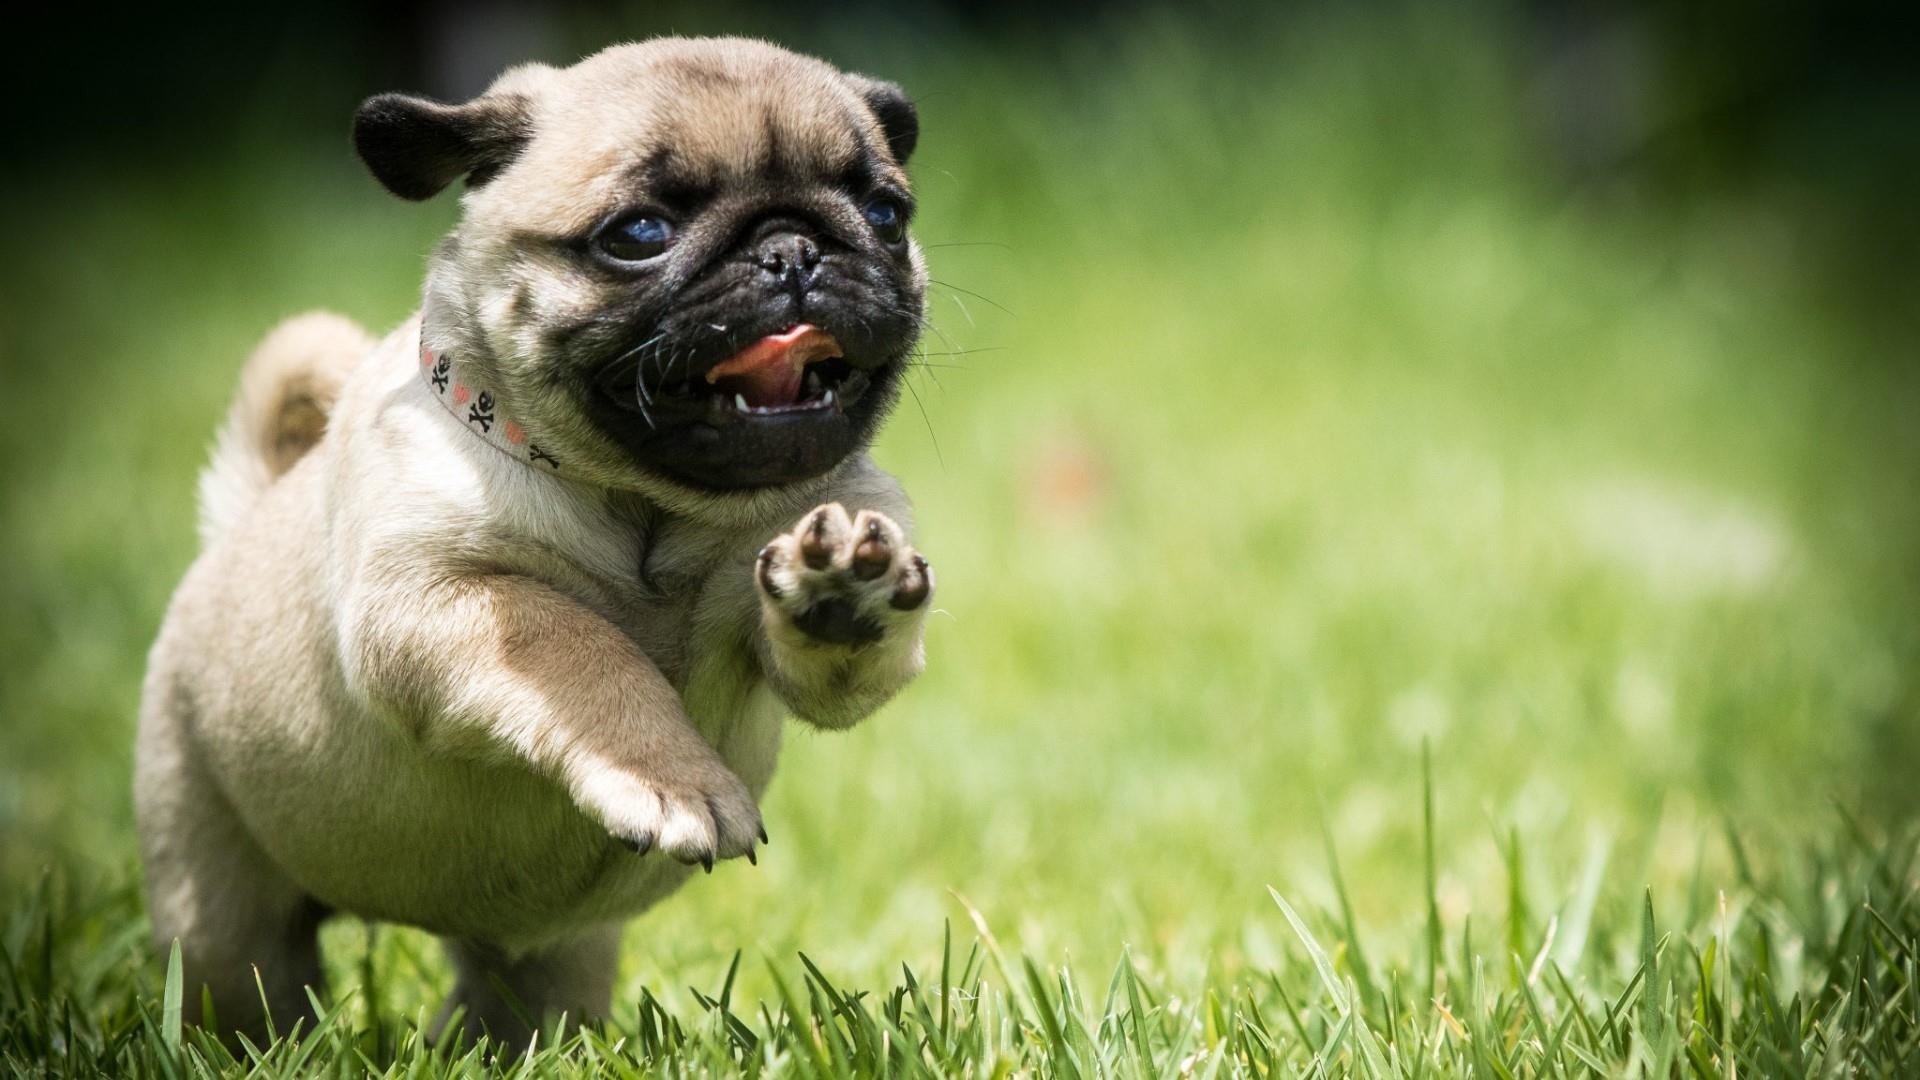 Free download Cute Pug Dog Wallpapers Top Free Cute Pug Dog Backgrounds [1920x1080] for your